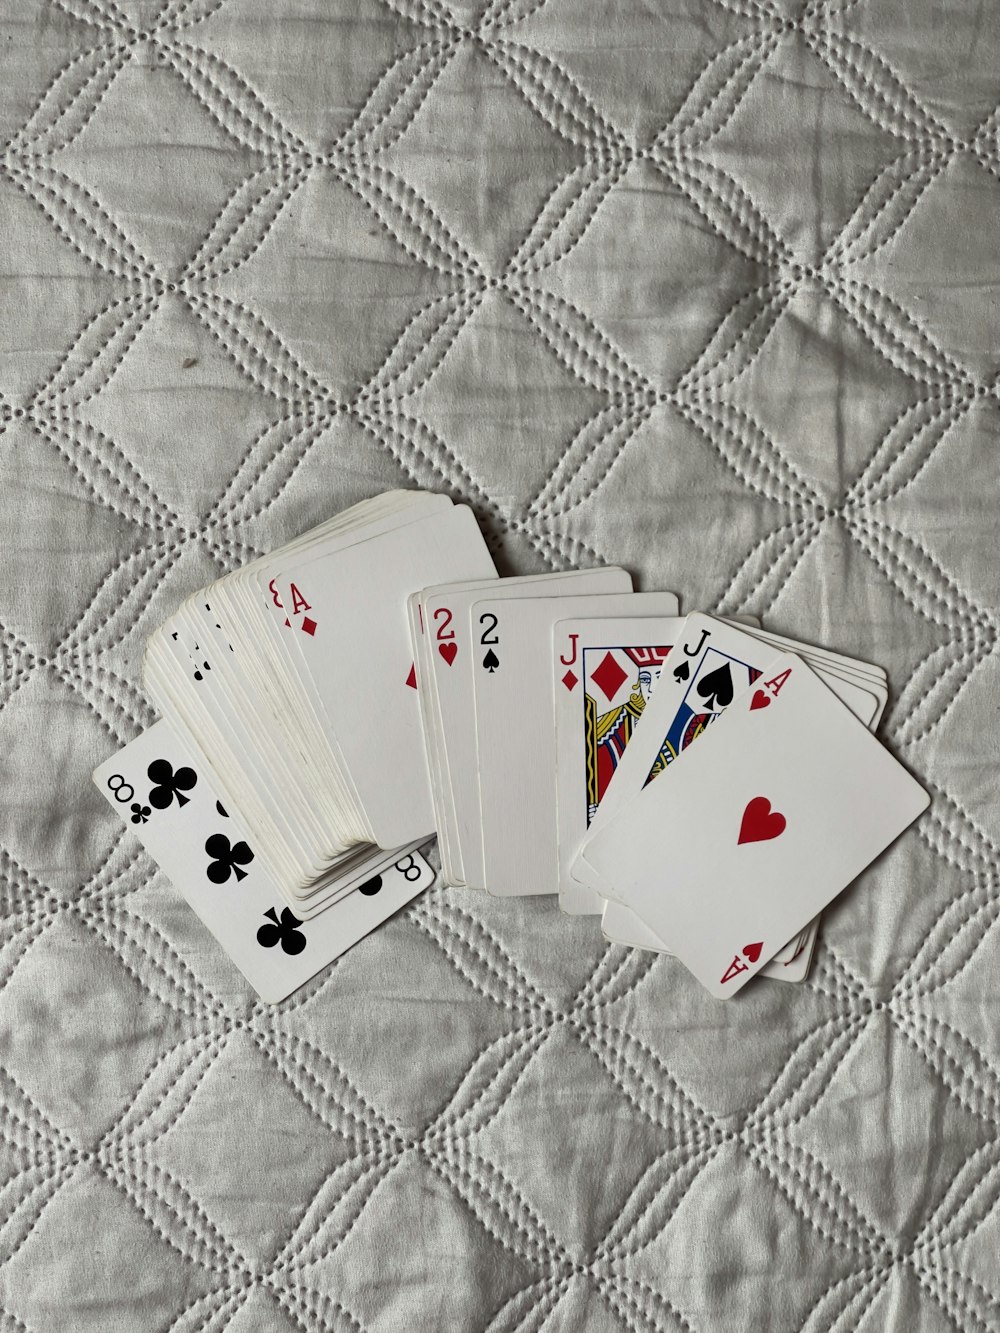 four playing cards are laying on a quilt